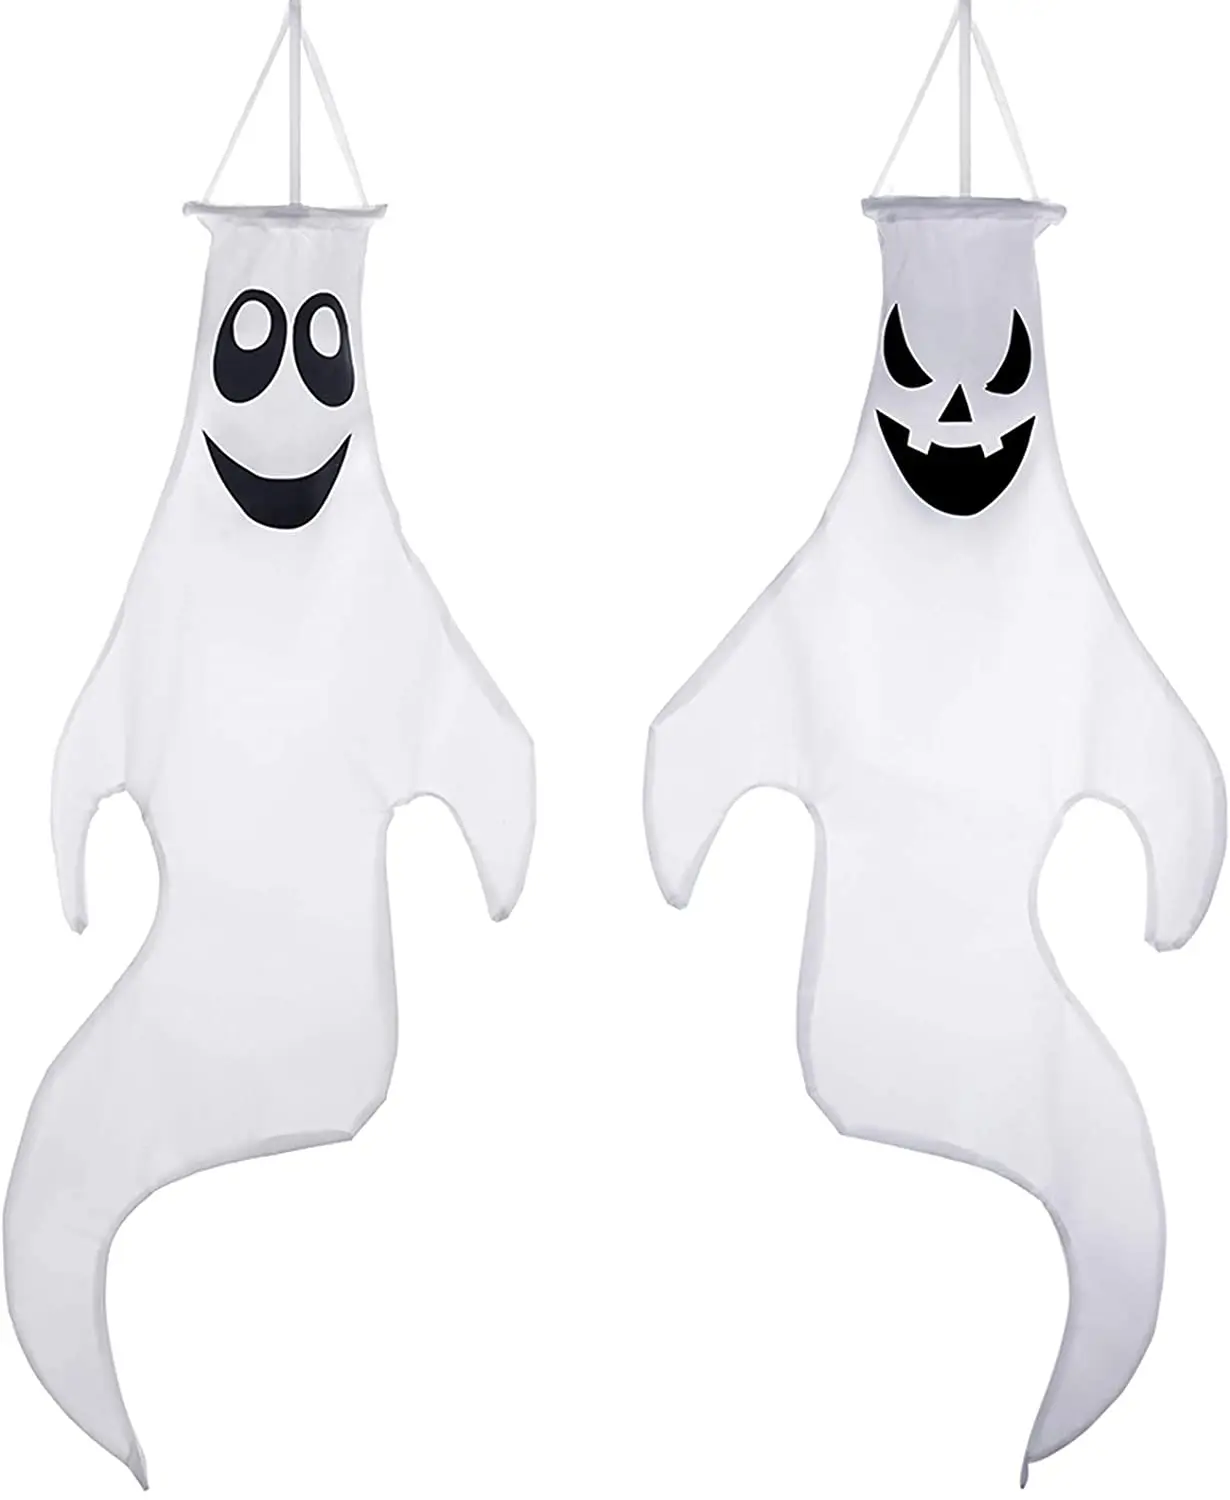 Includes Swivel Hanging Clip White Shaking Ghost FUNNISM Large 48 inch Ghost Windsock Halloween Hanging Decoration Spun Polyester Fabric 